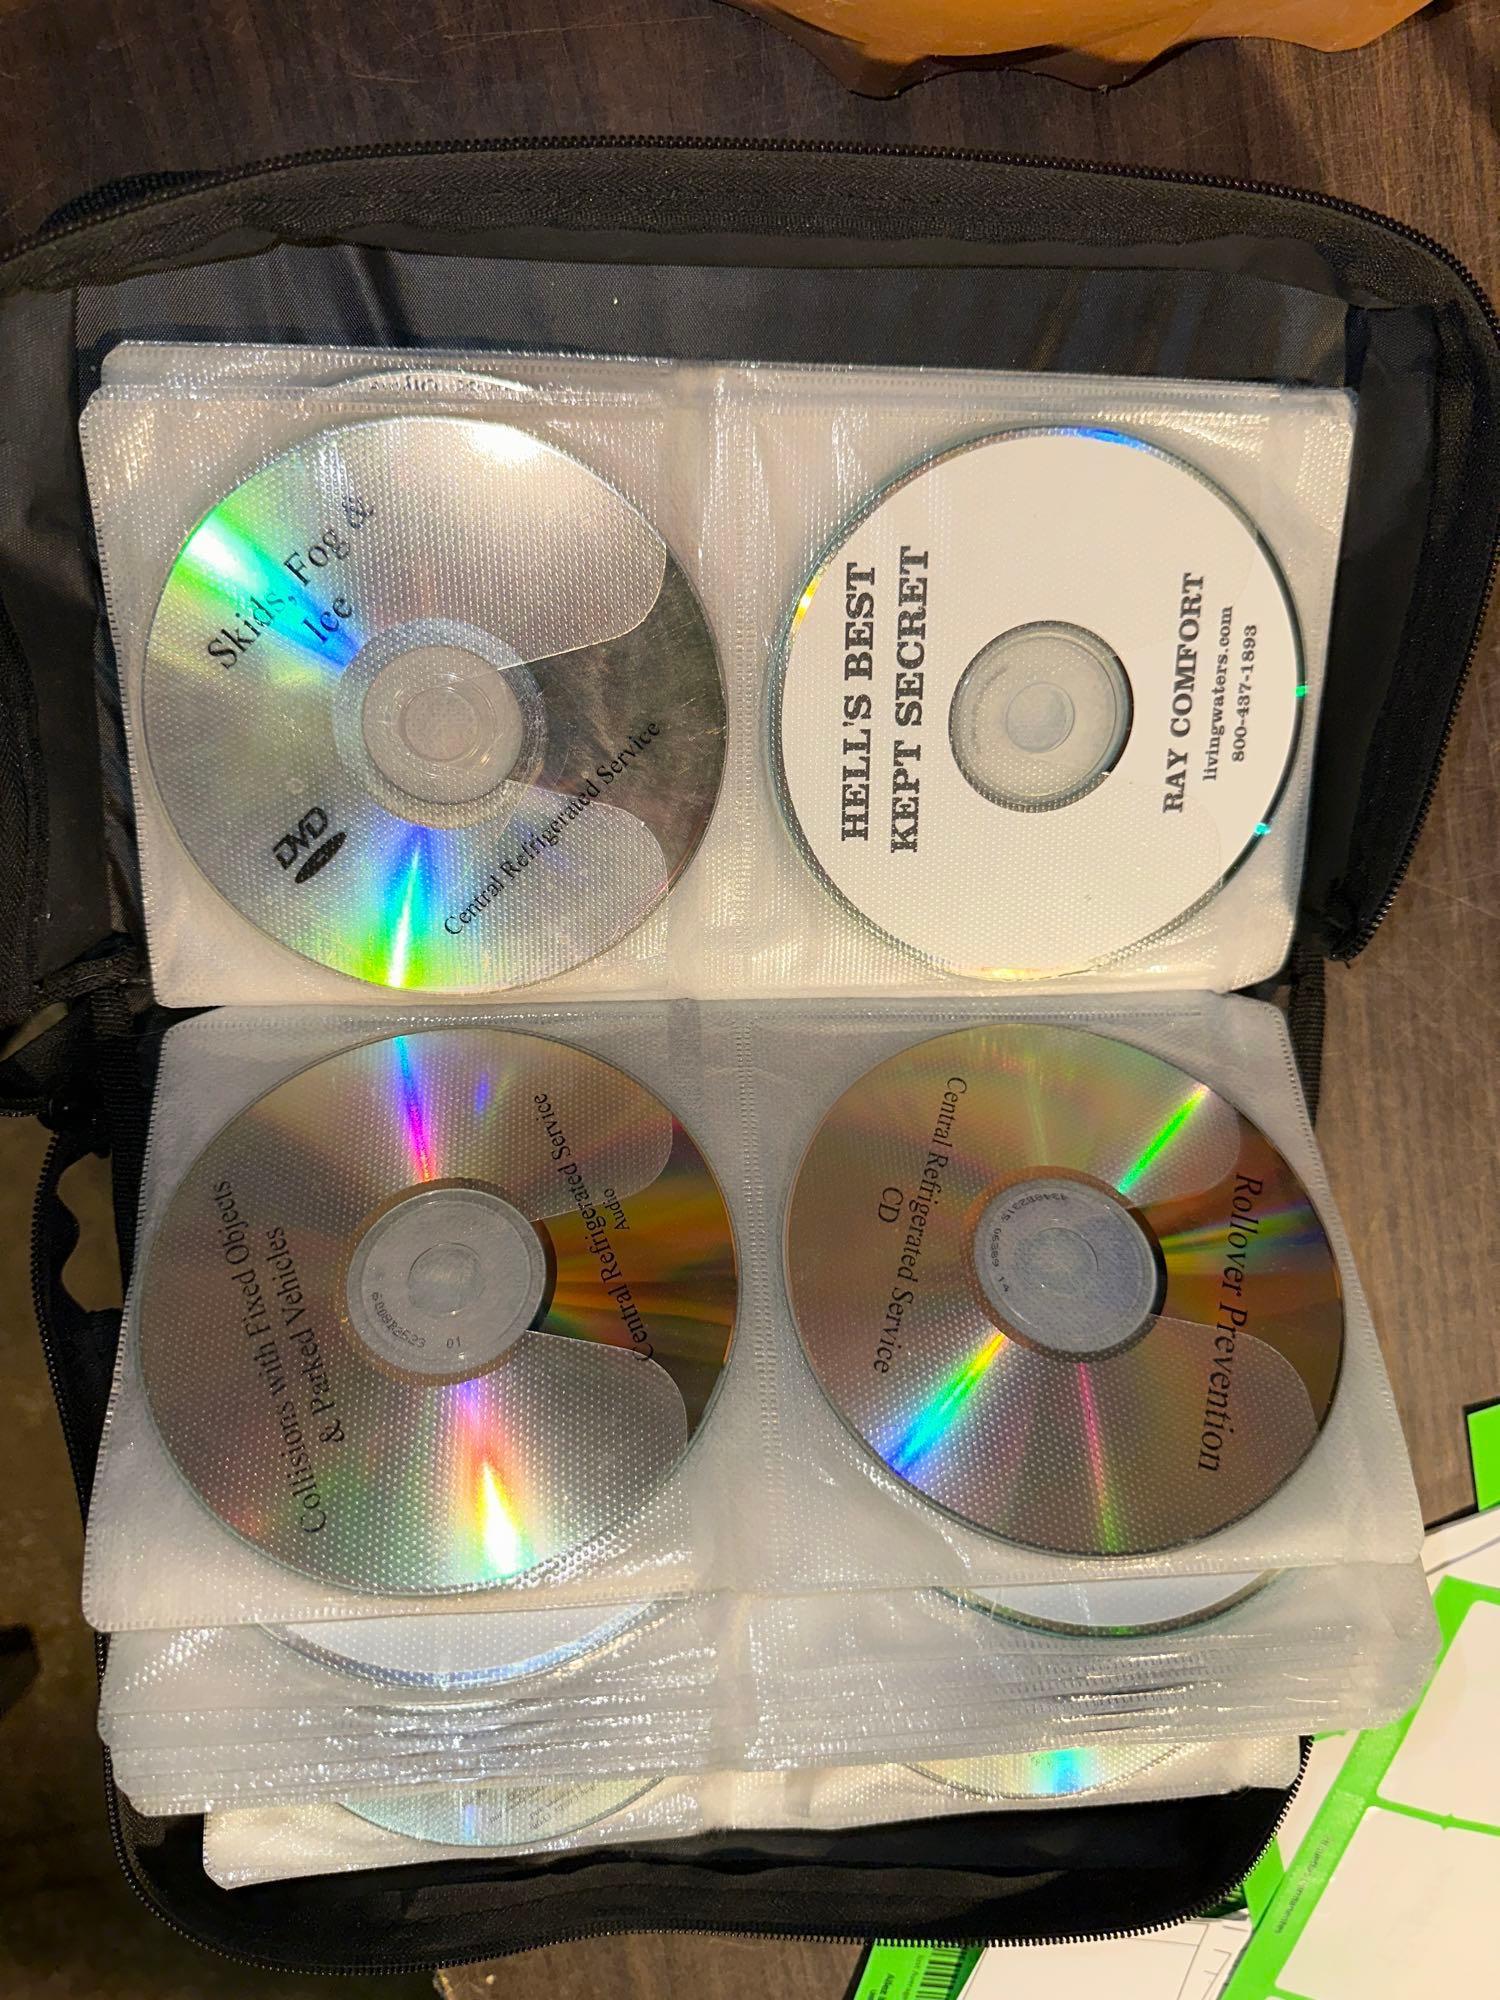 Binder full of CD's and DVD's